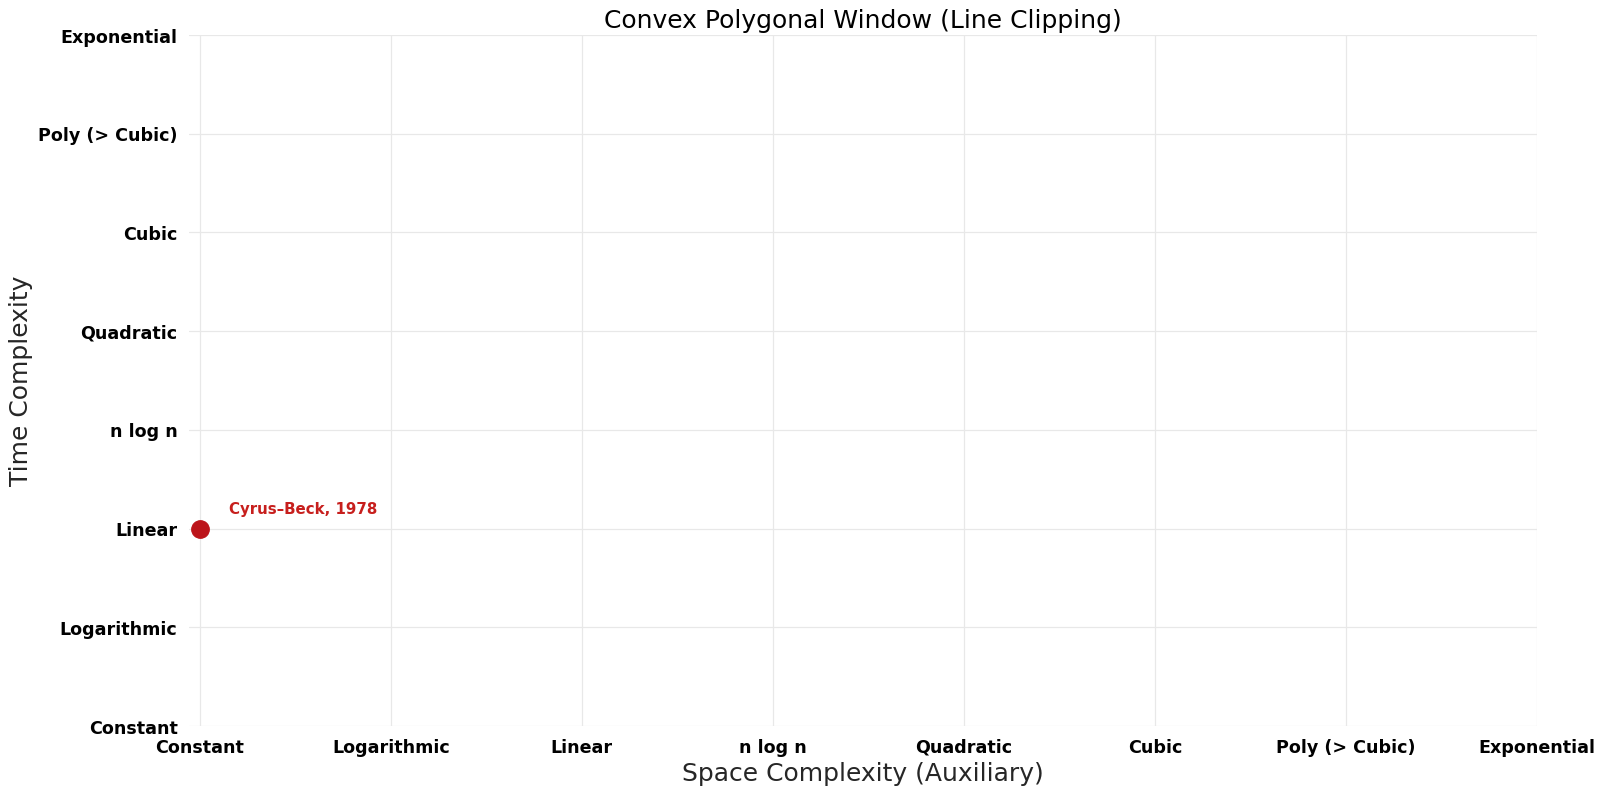 Line Clipping - Convex Polygonal Window - Pareto Frontier.png